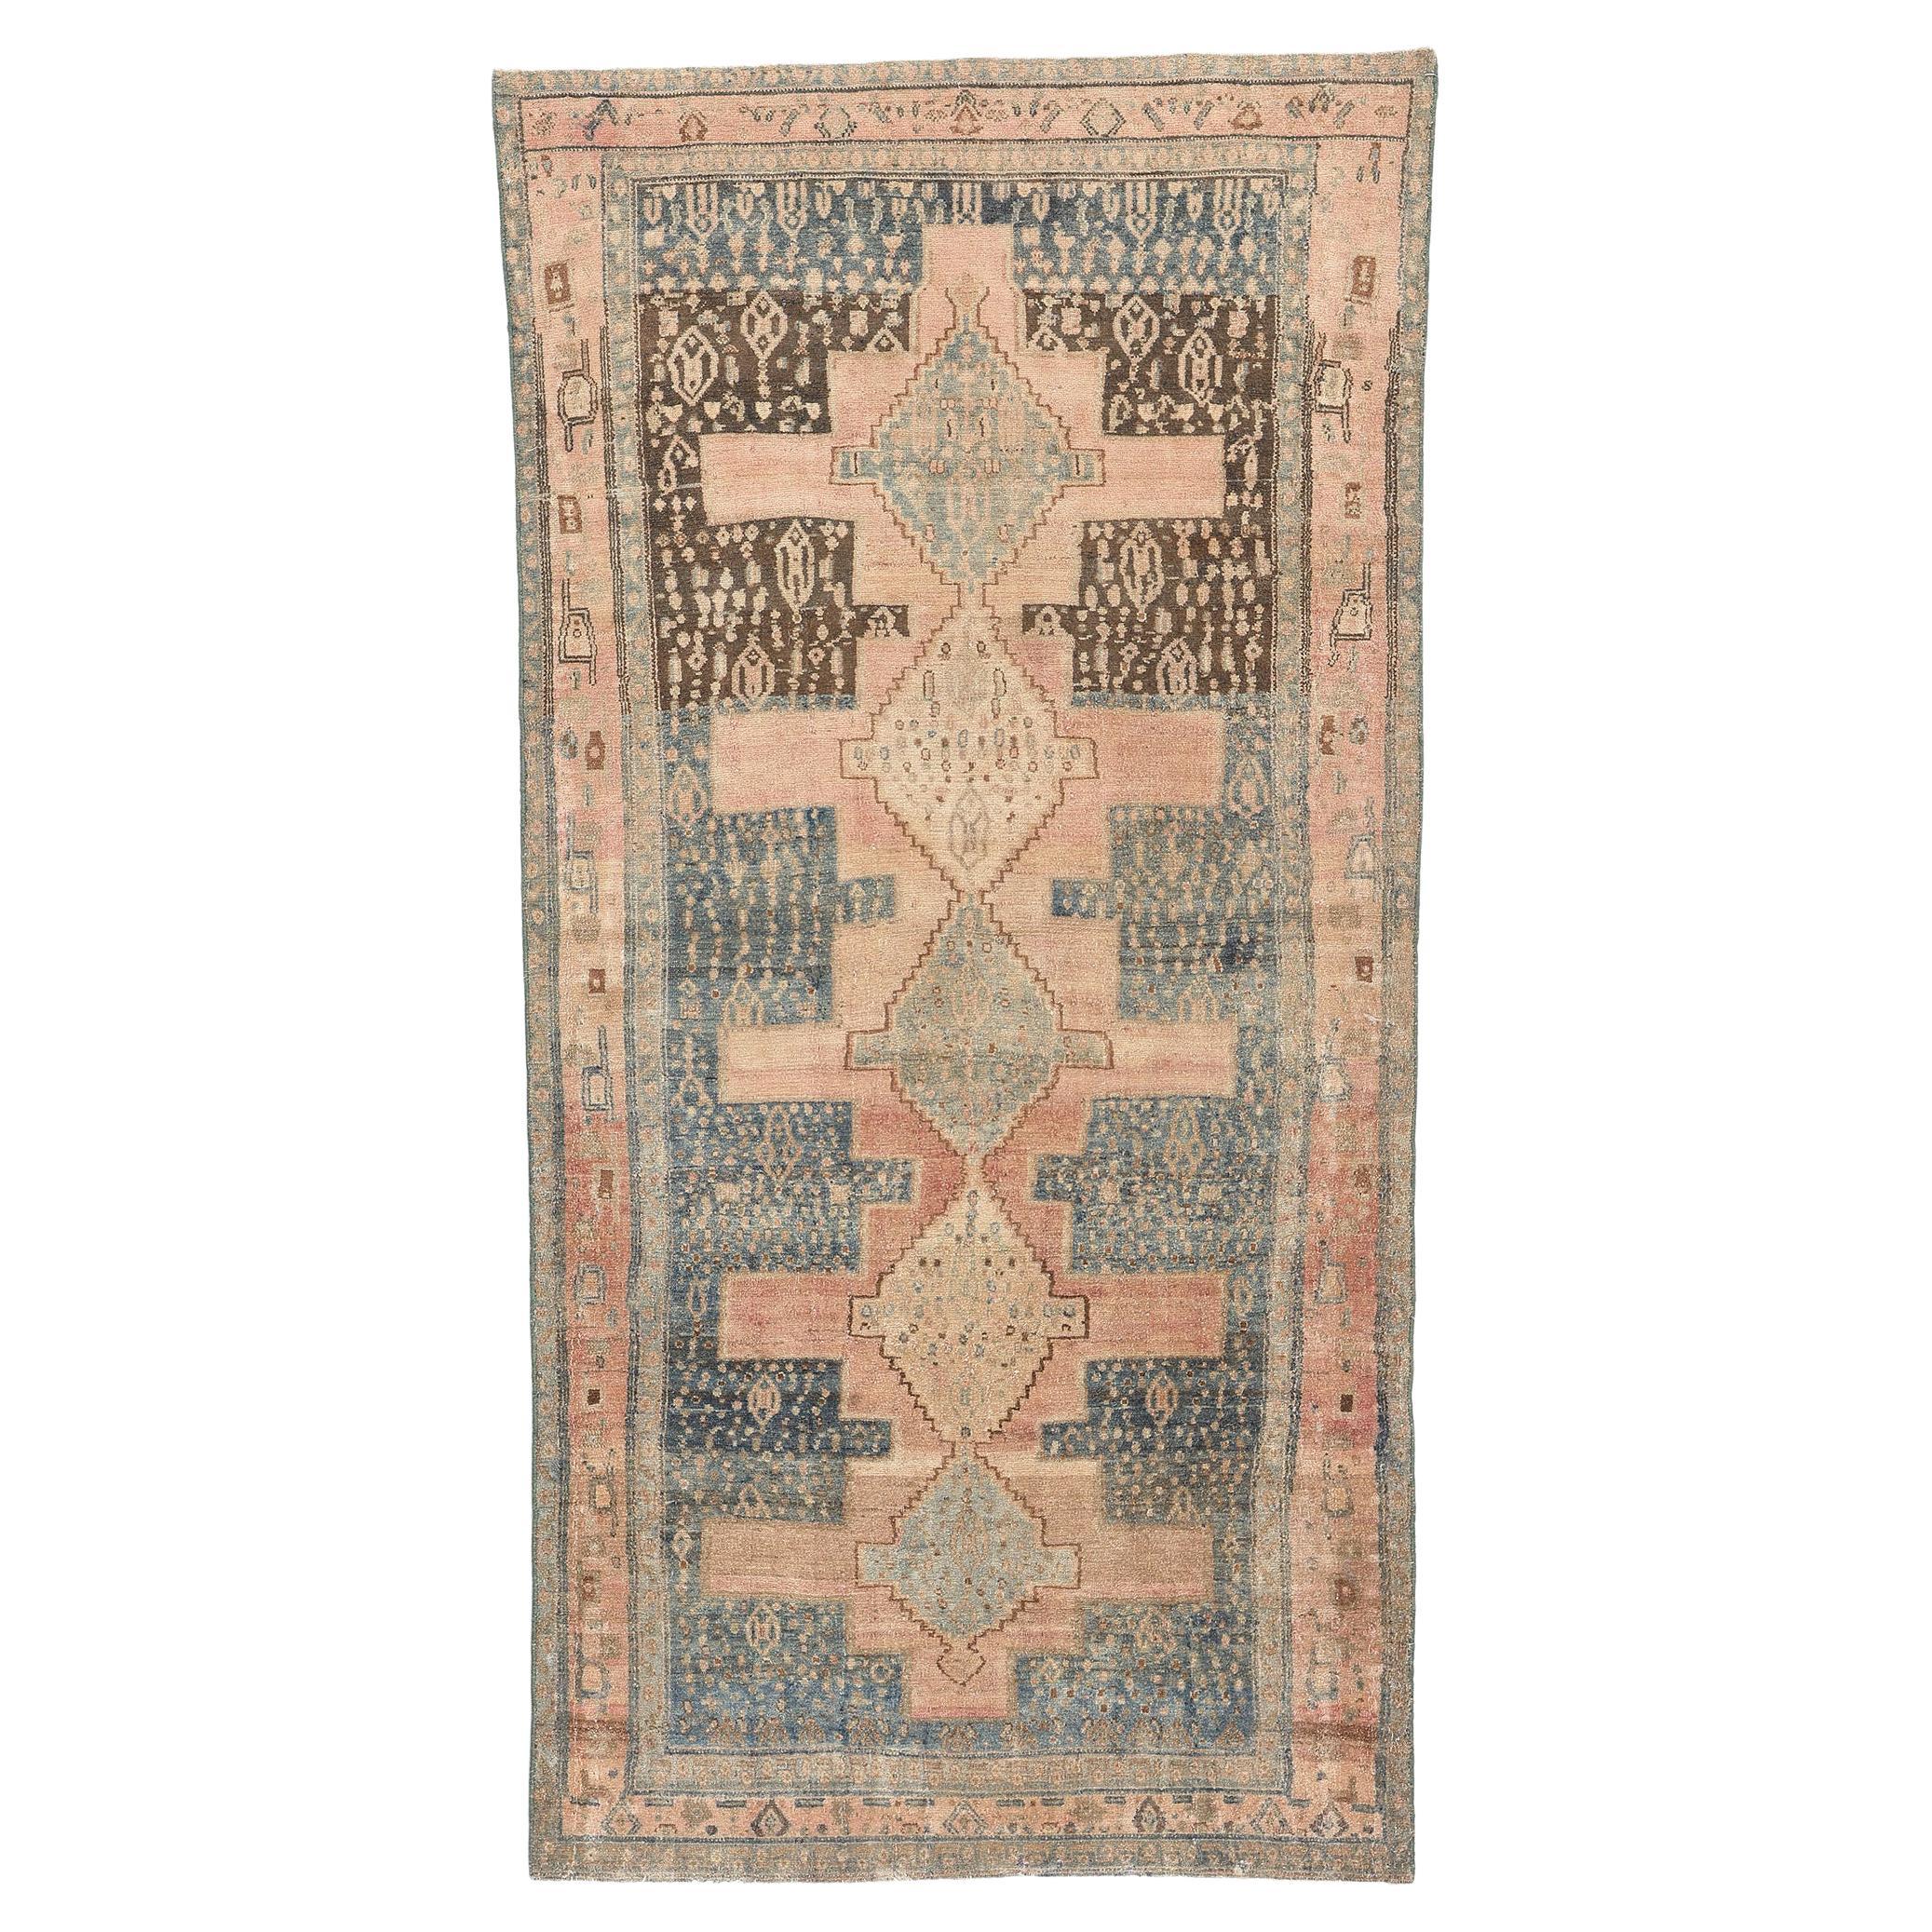 Antique Persian Malayer Rug, Relaxed Refinement Meets Nomadic Charm